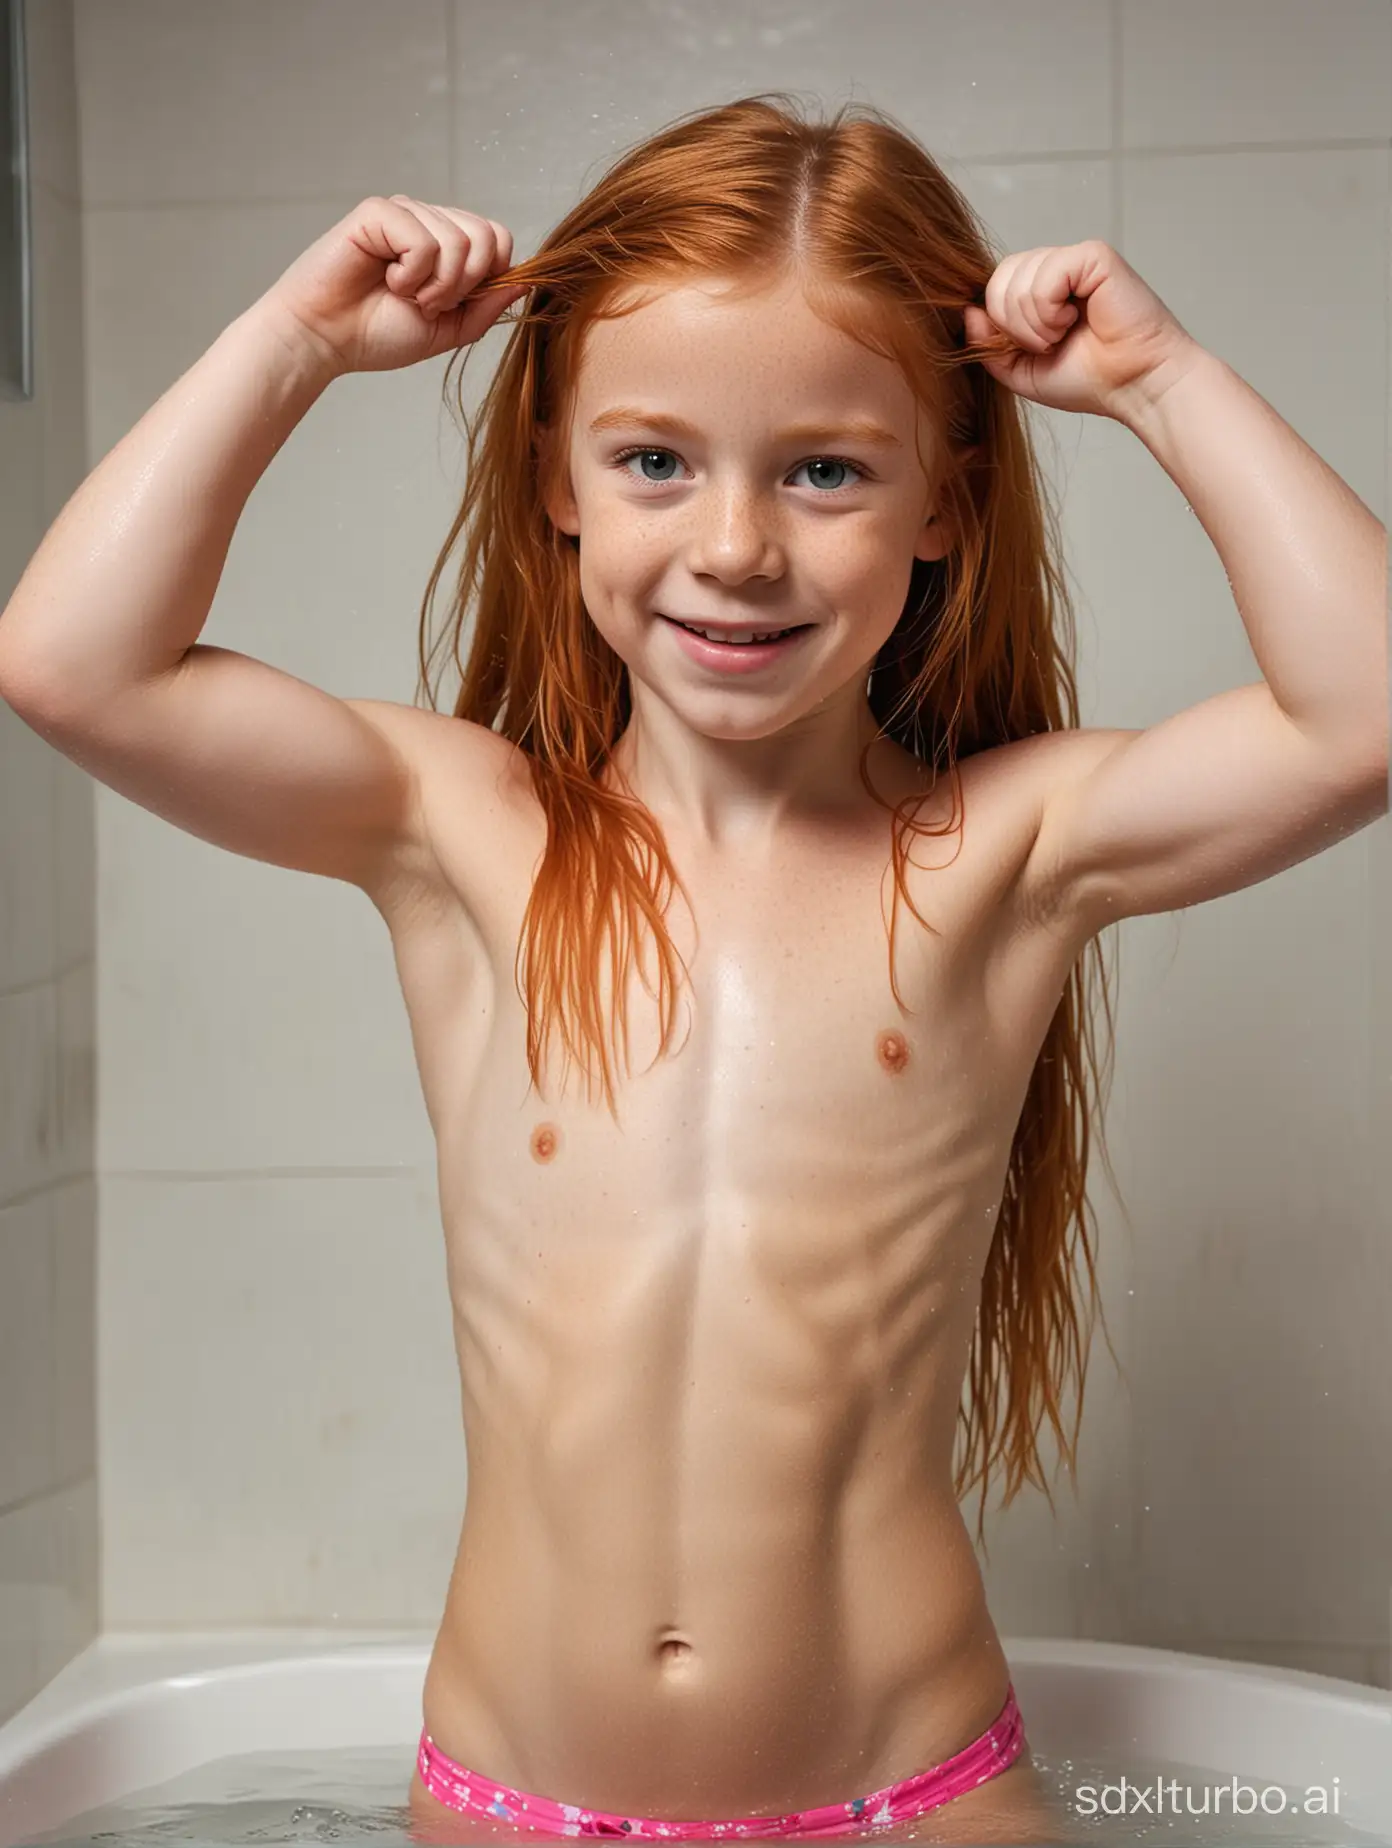 7 years old girl, long ginger hair, showing her very muscular abs, bathing